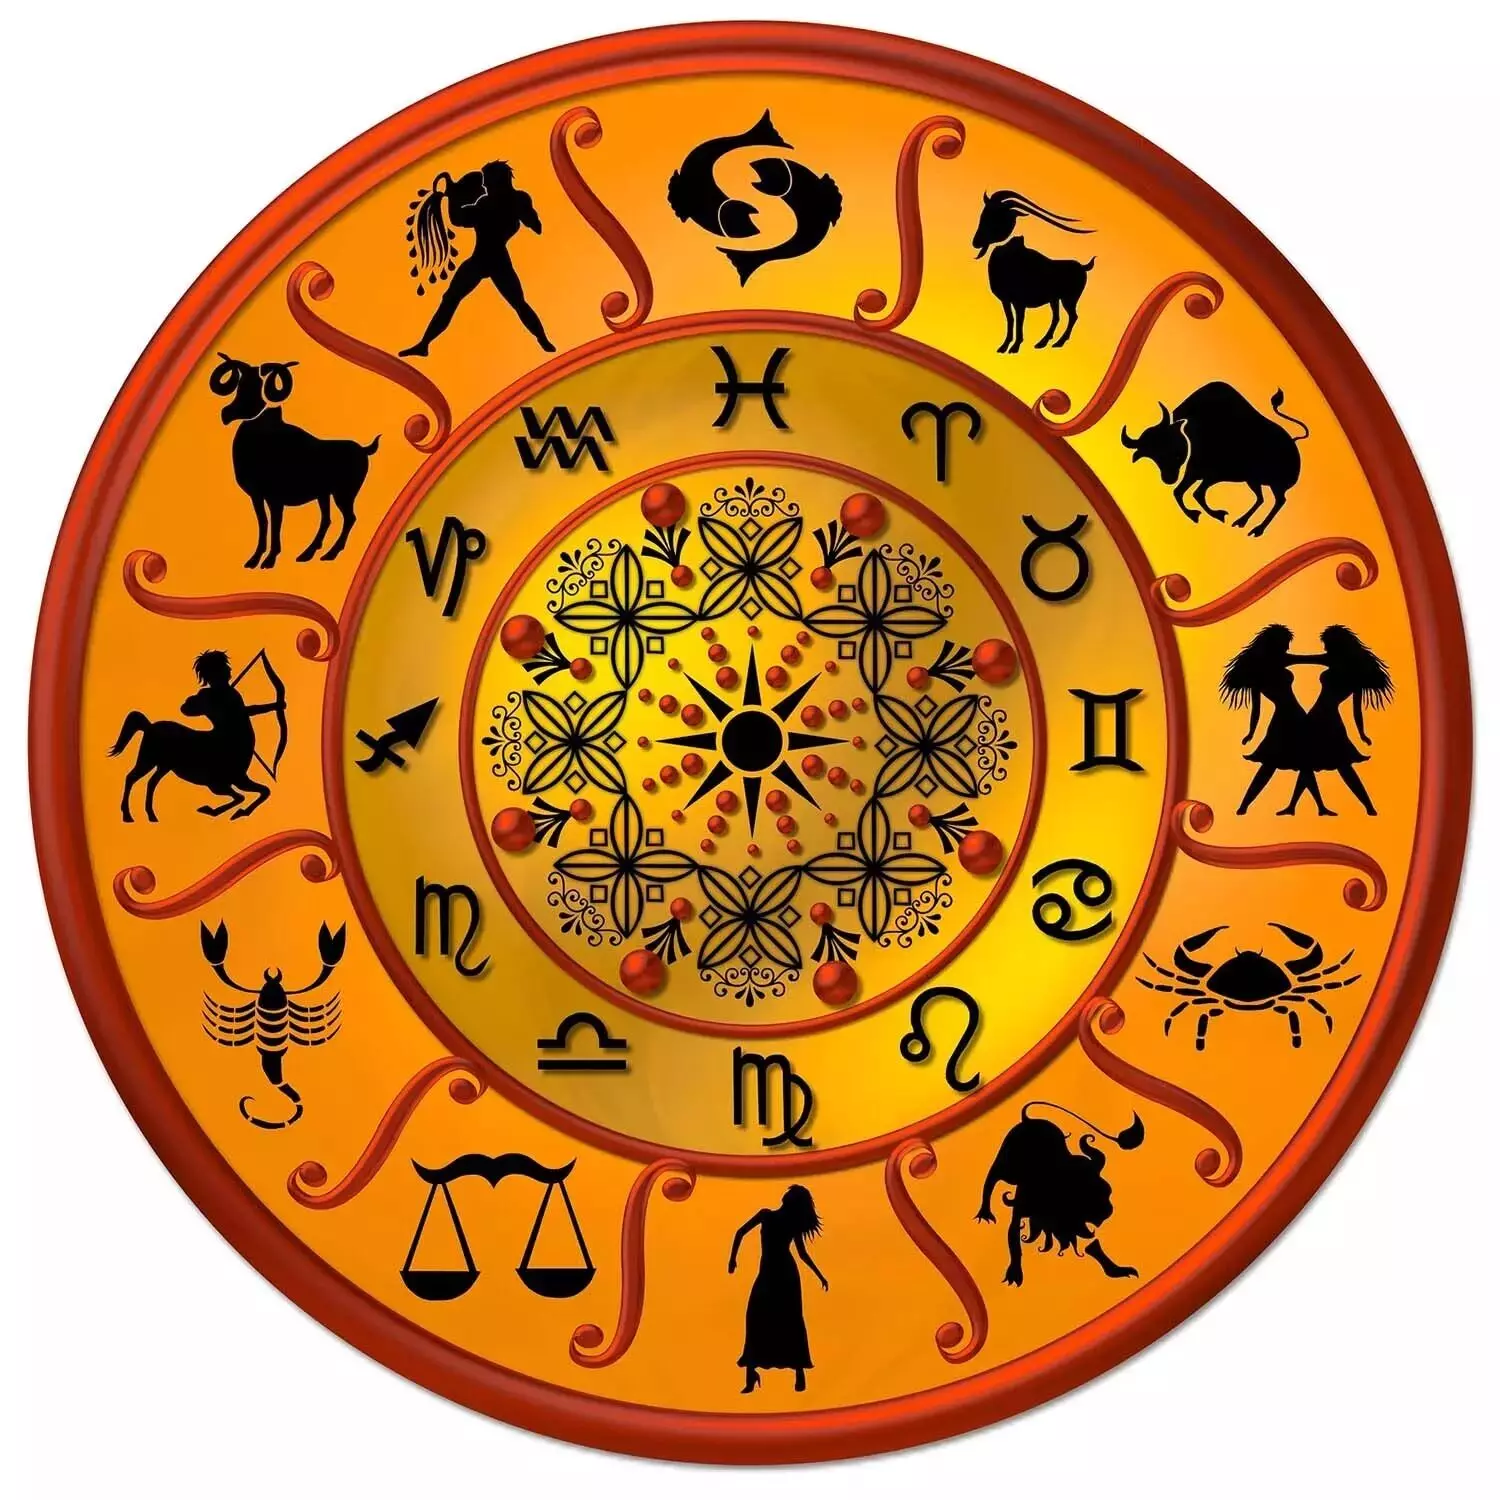 31 December   – Know your todays horoscope